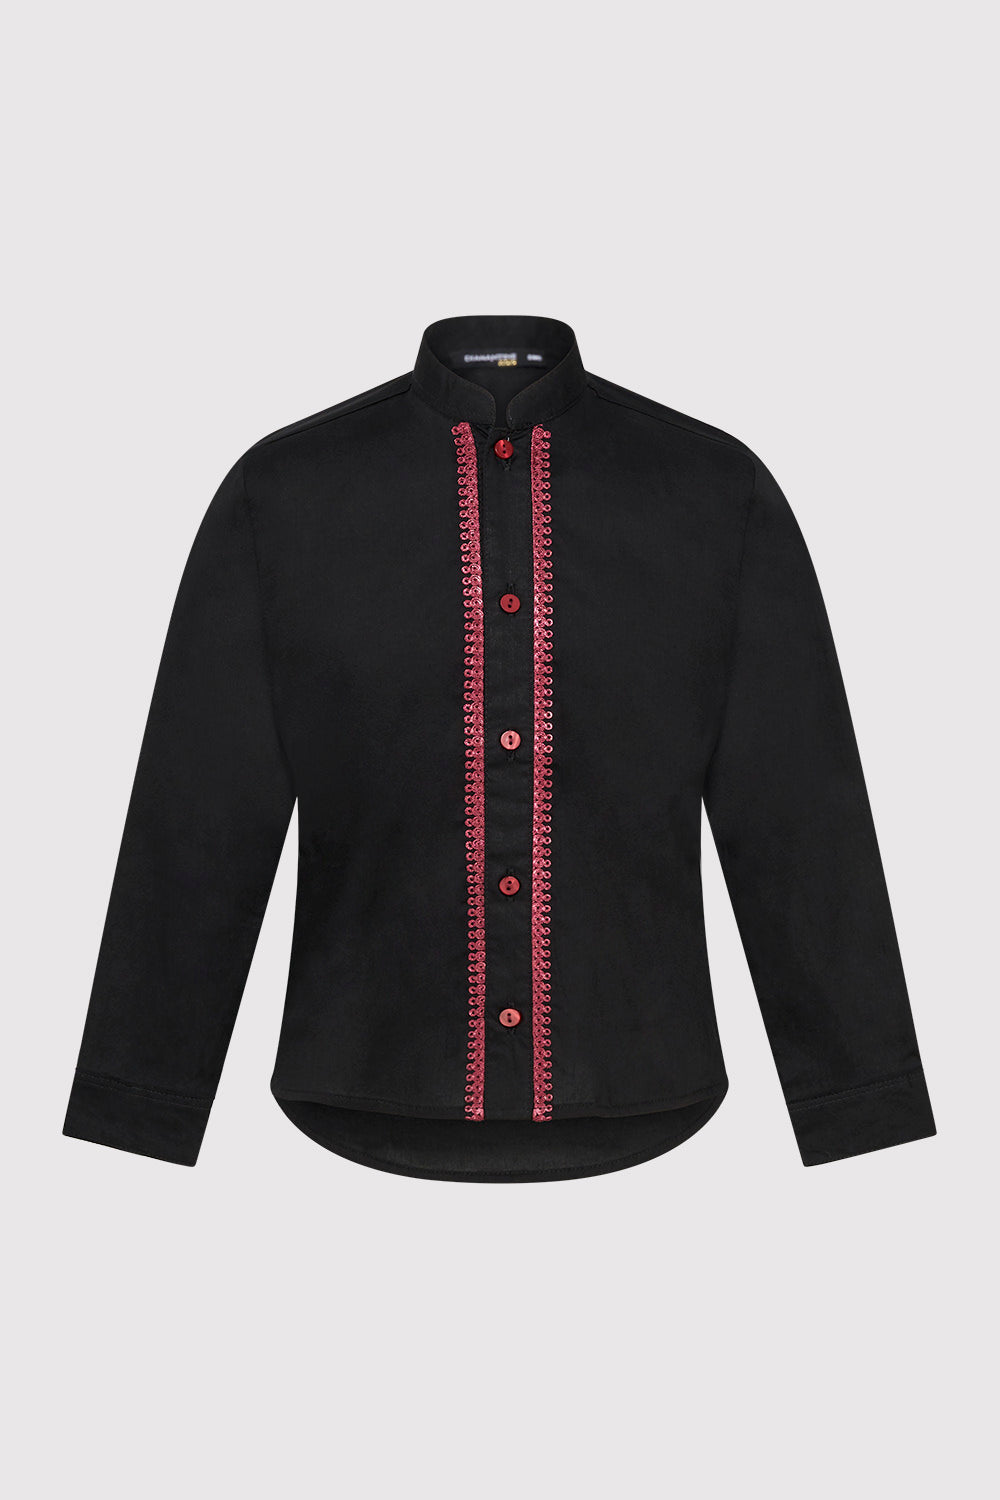 Long Sleeve Button-Up Boy's Shirt with Contrast Stitching in Black (2-12yrs)